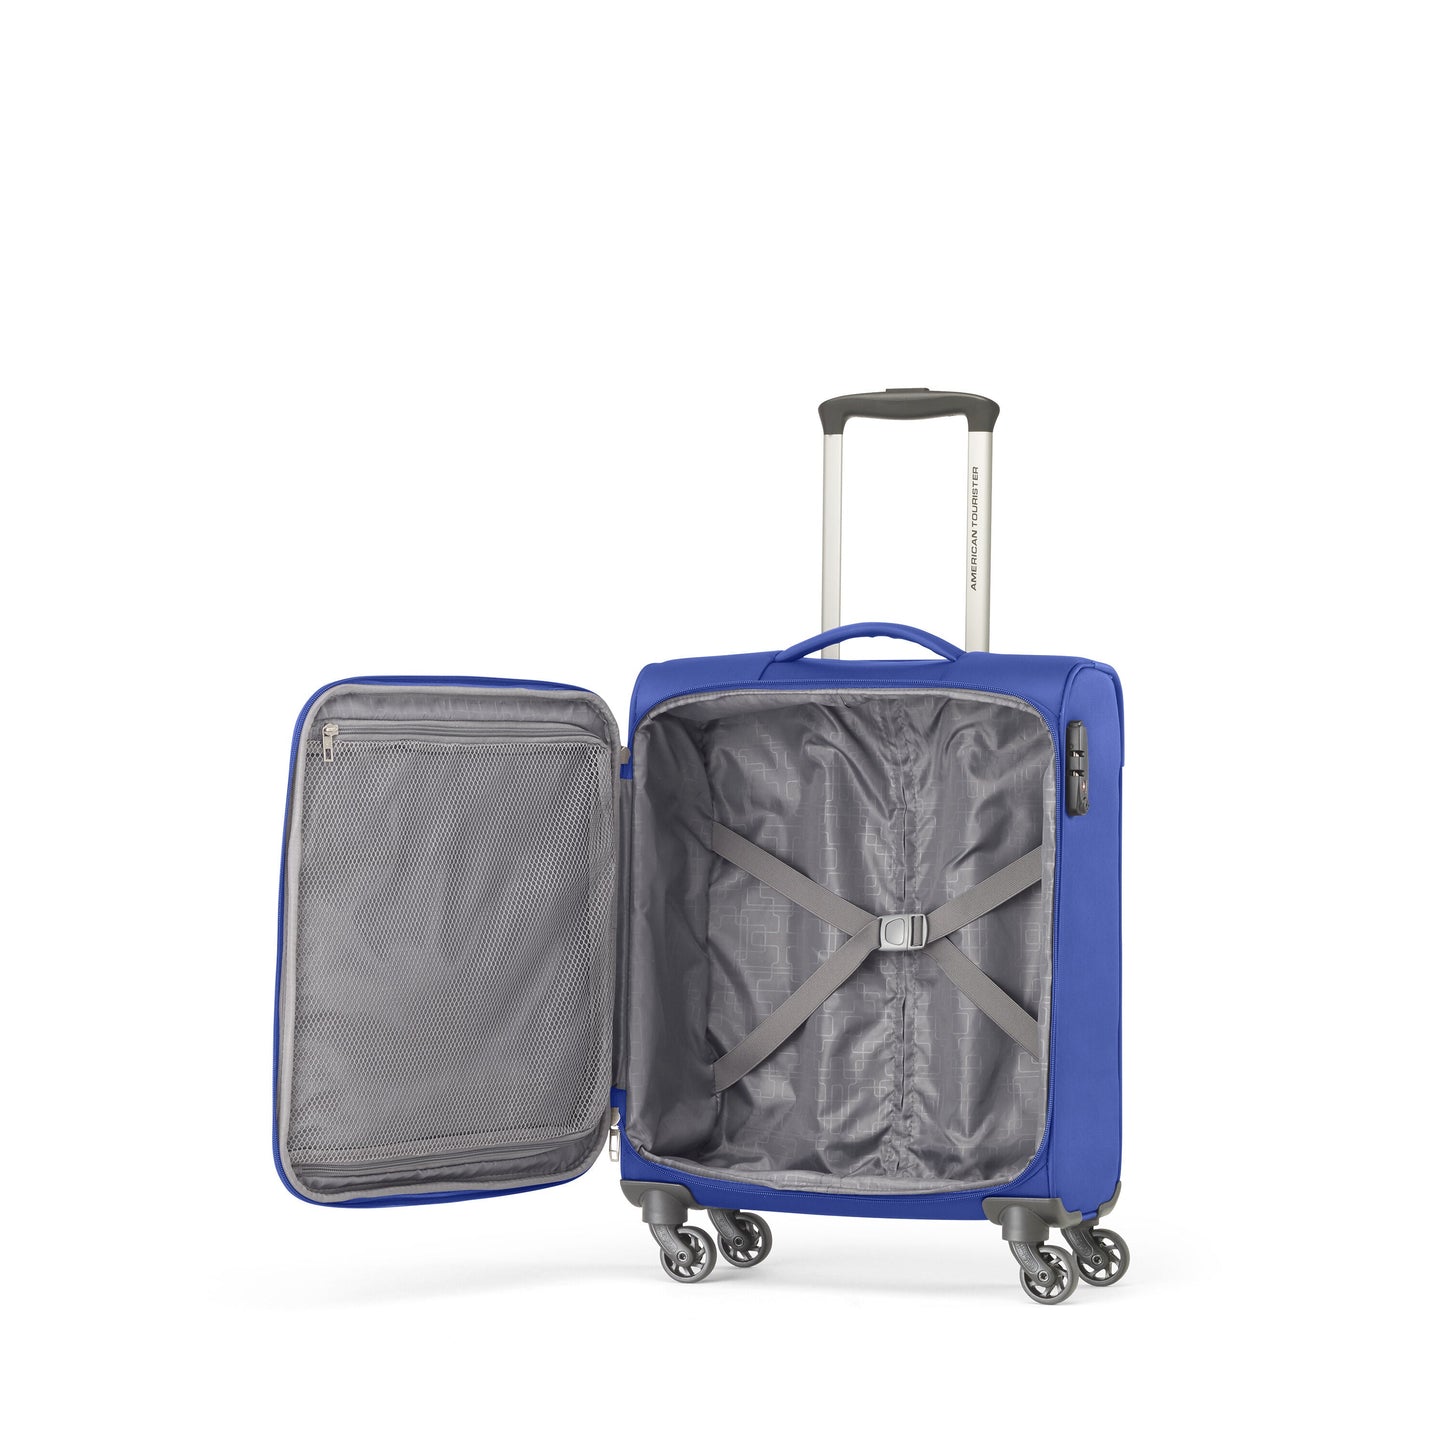 American Tourister Bayview NXT Spinner Softside Carry-On Luggage